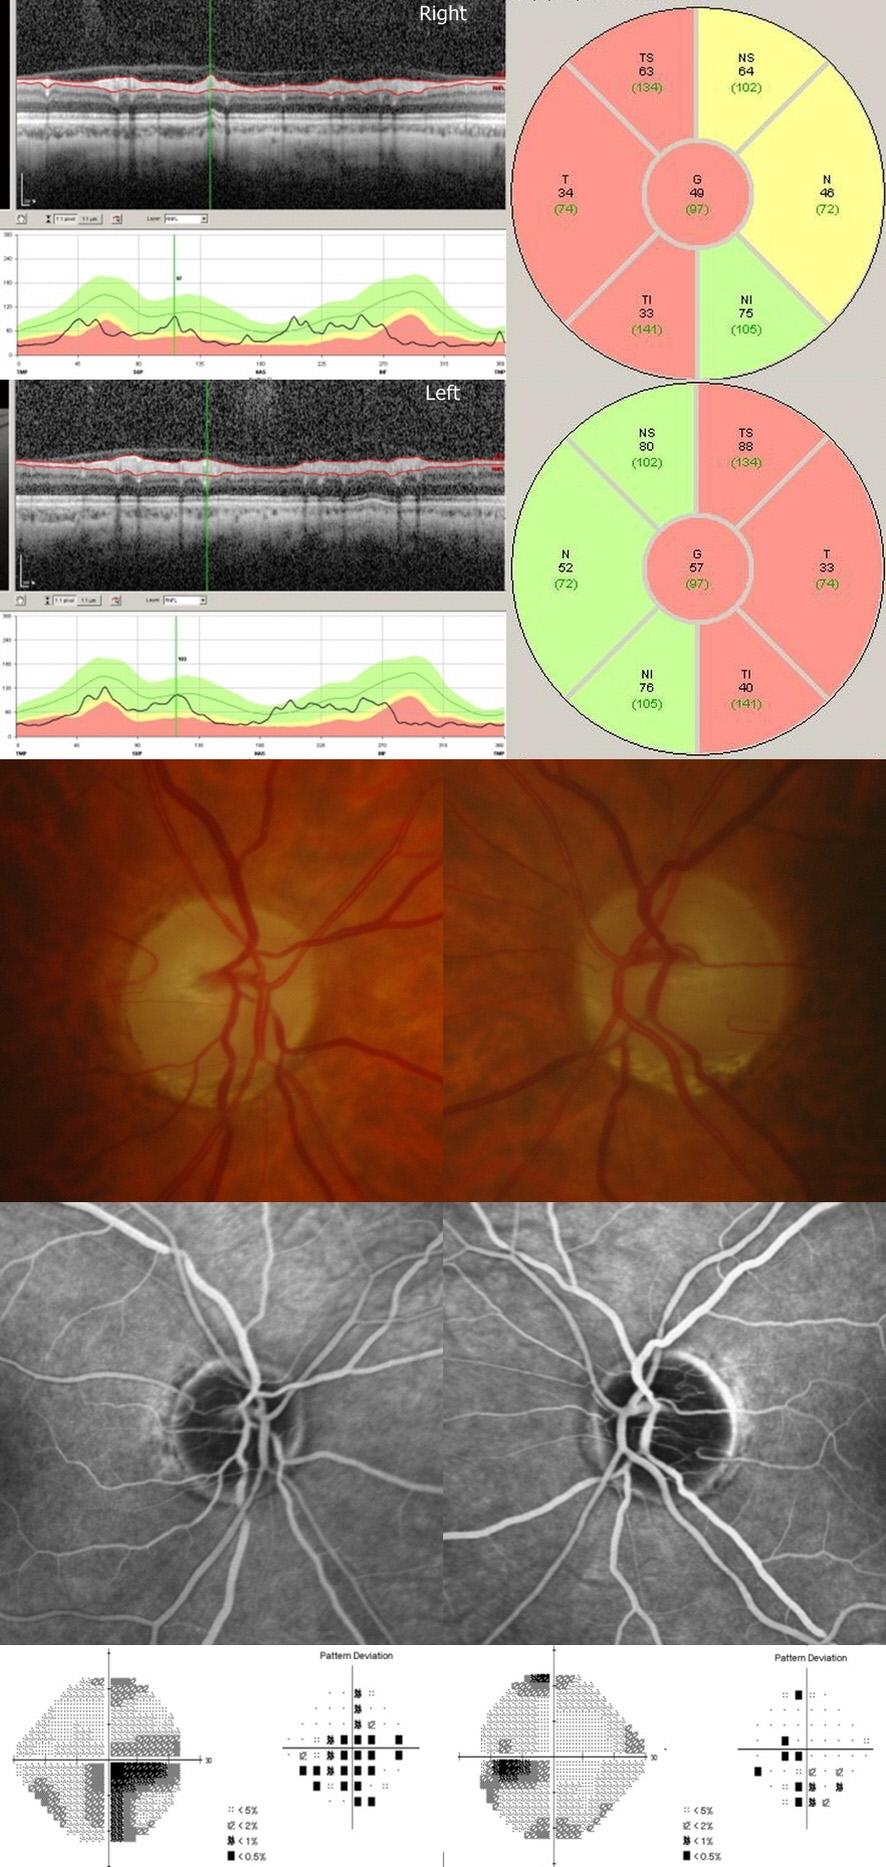 (A) At initial presentation, RNFL thickness values exceed normal limit of both eye. The optic disc is swollen and margin of the optic disc is not clear. Late phase FAG showed leakage at optic disc.